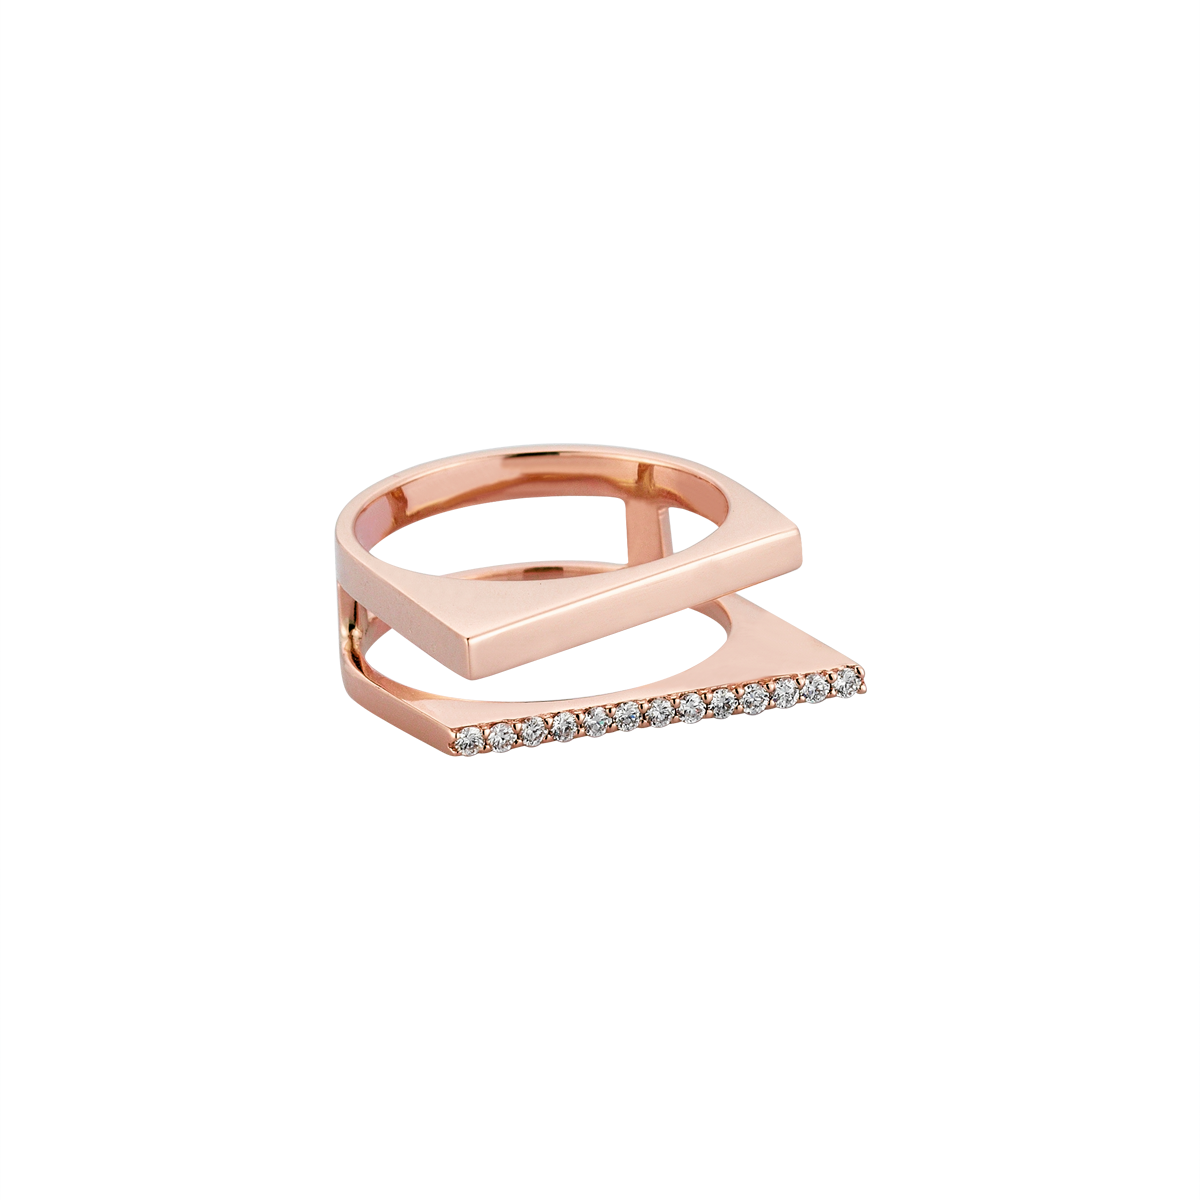 Angled Diamond Double Ring in Rose Gold - Her Story Shop